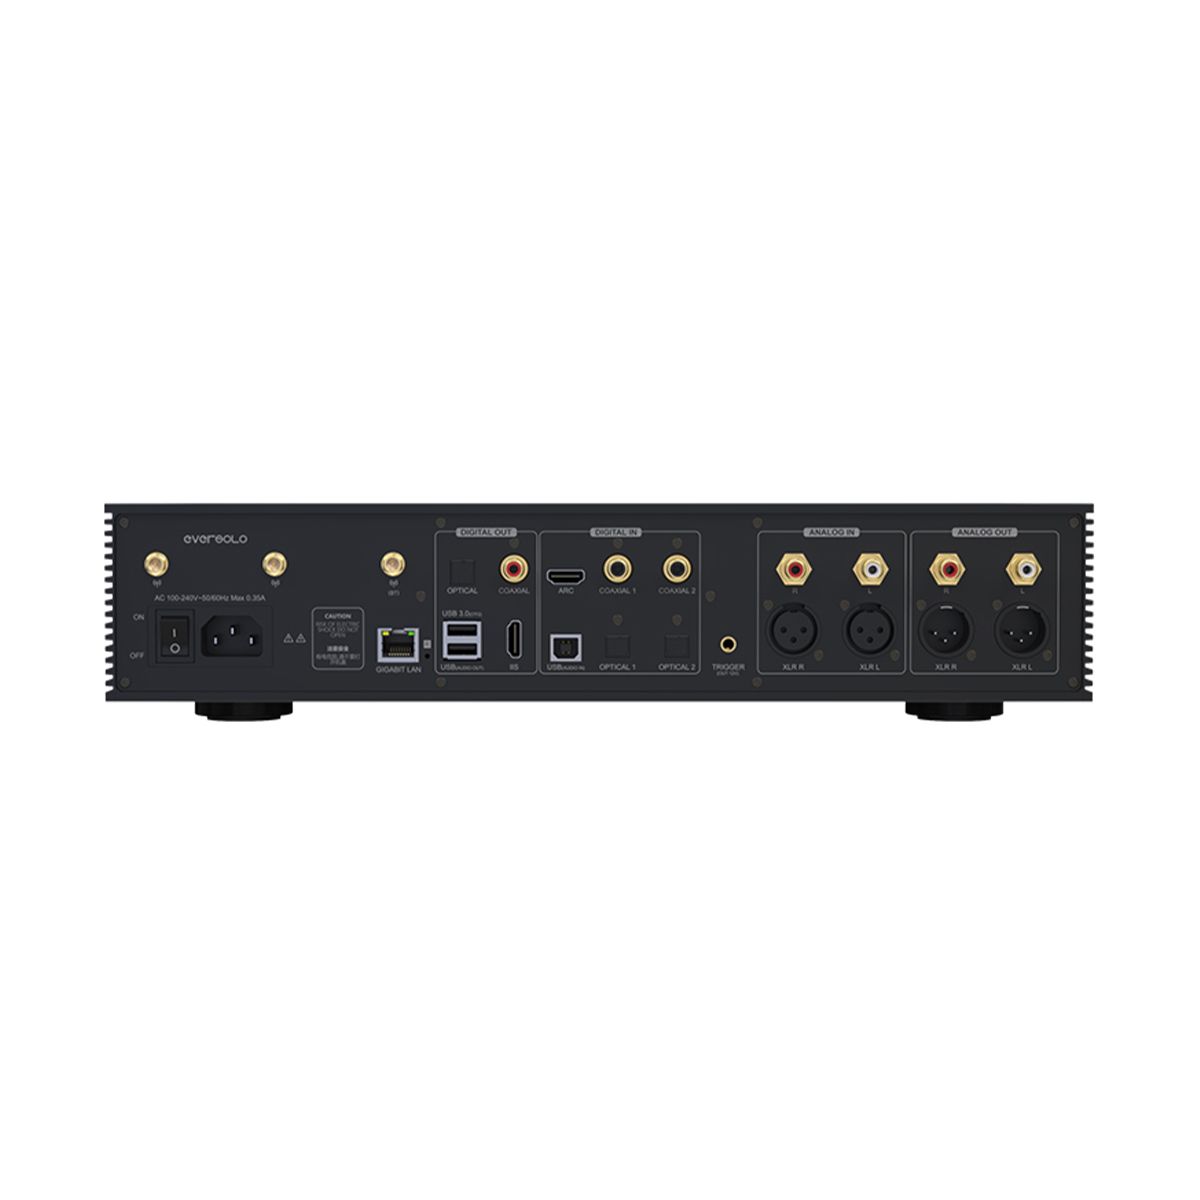 EverSolo DMP-A8 Network Streamer, DAC, & Preamp rear components view